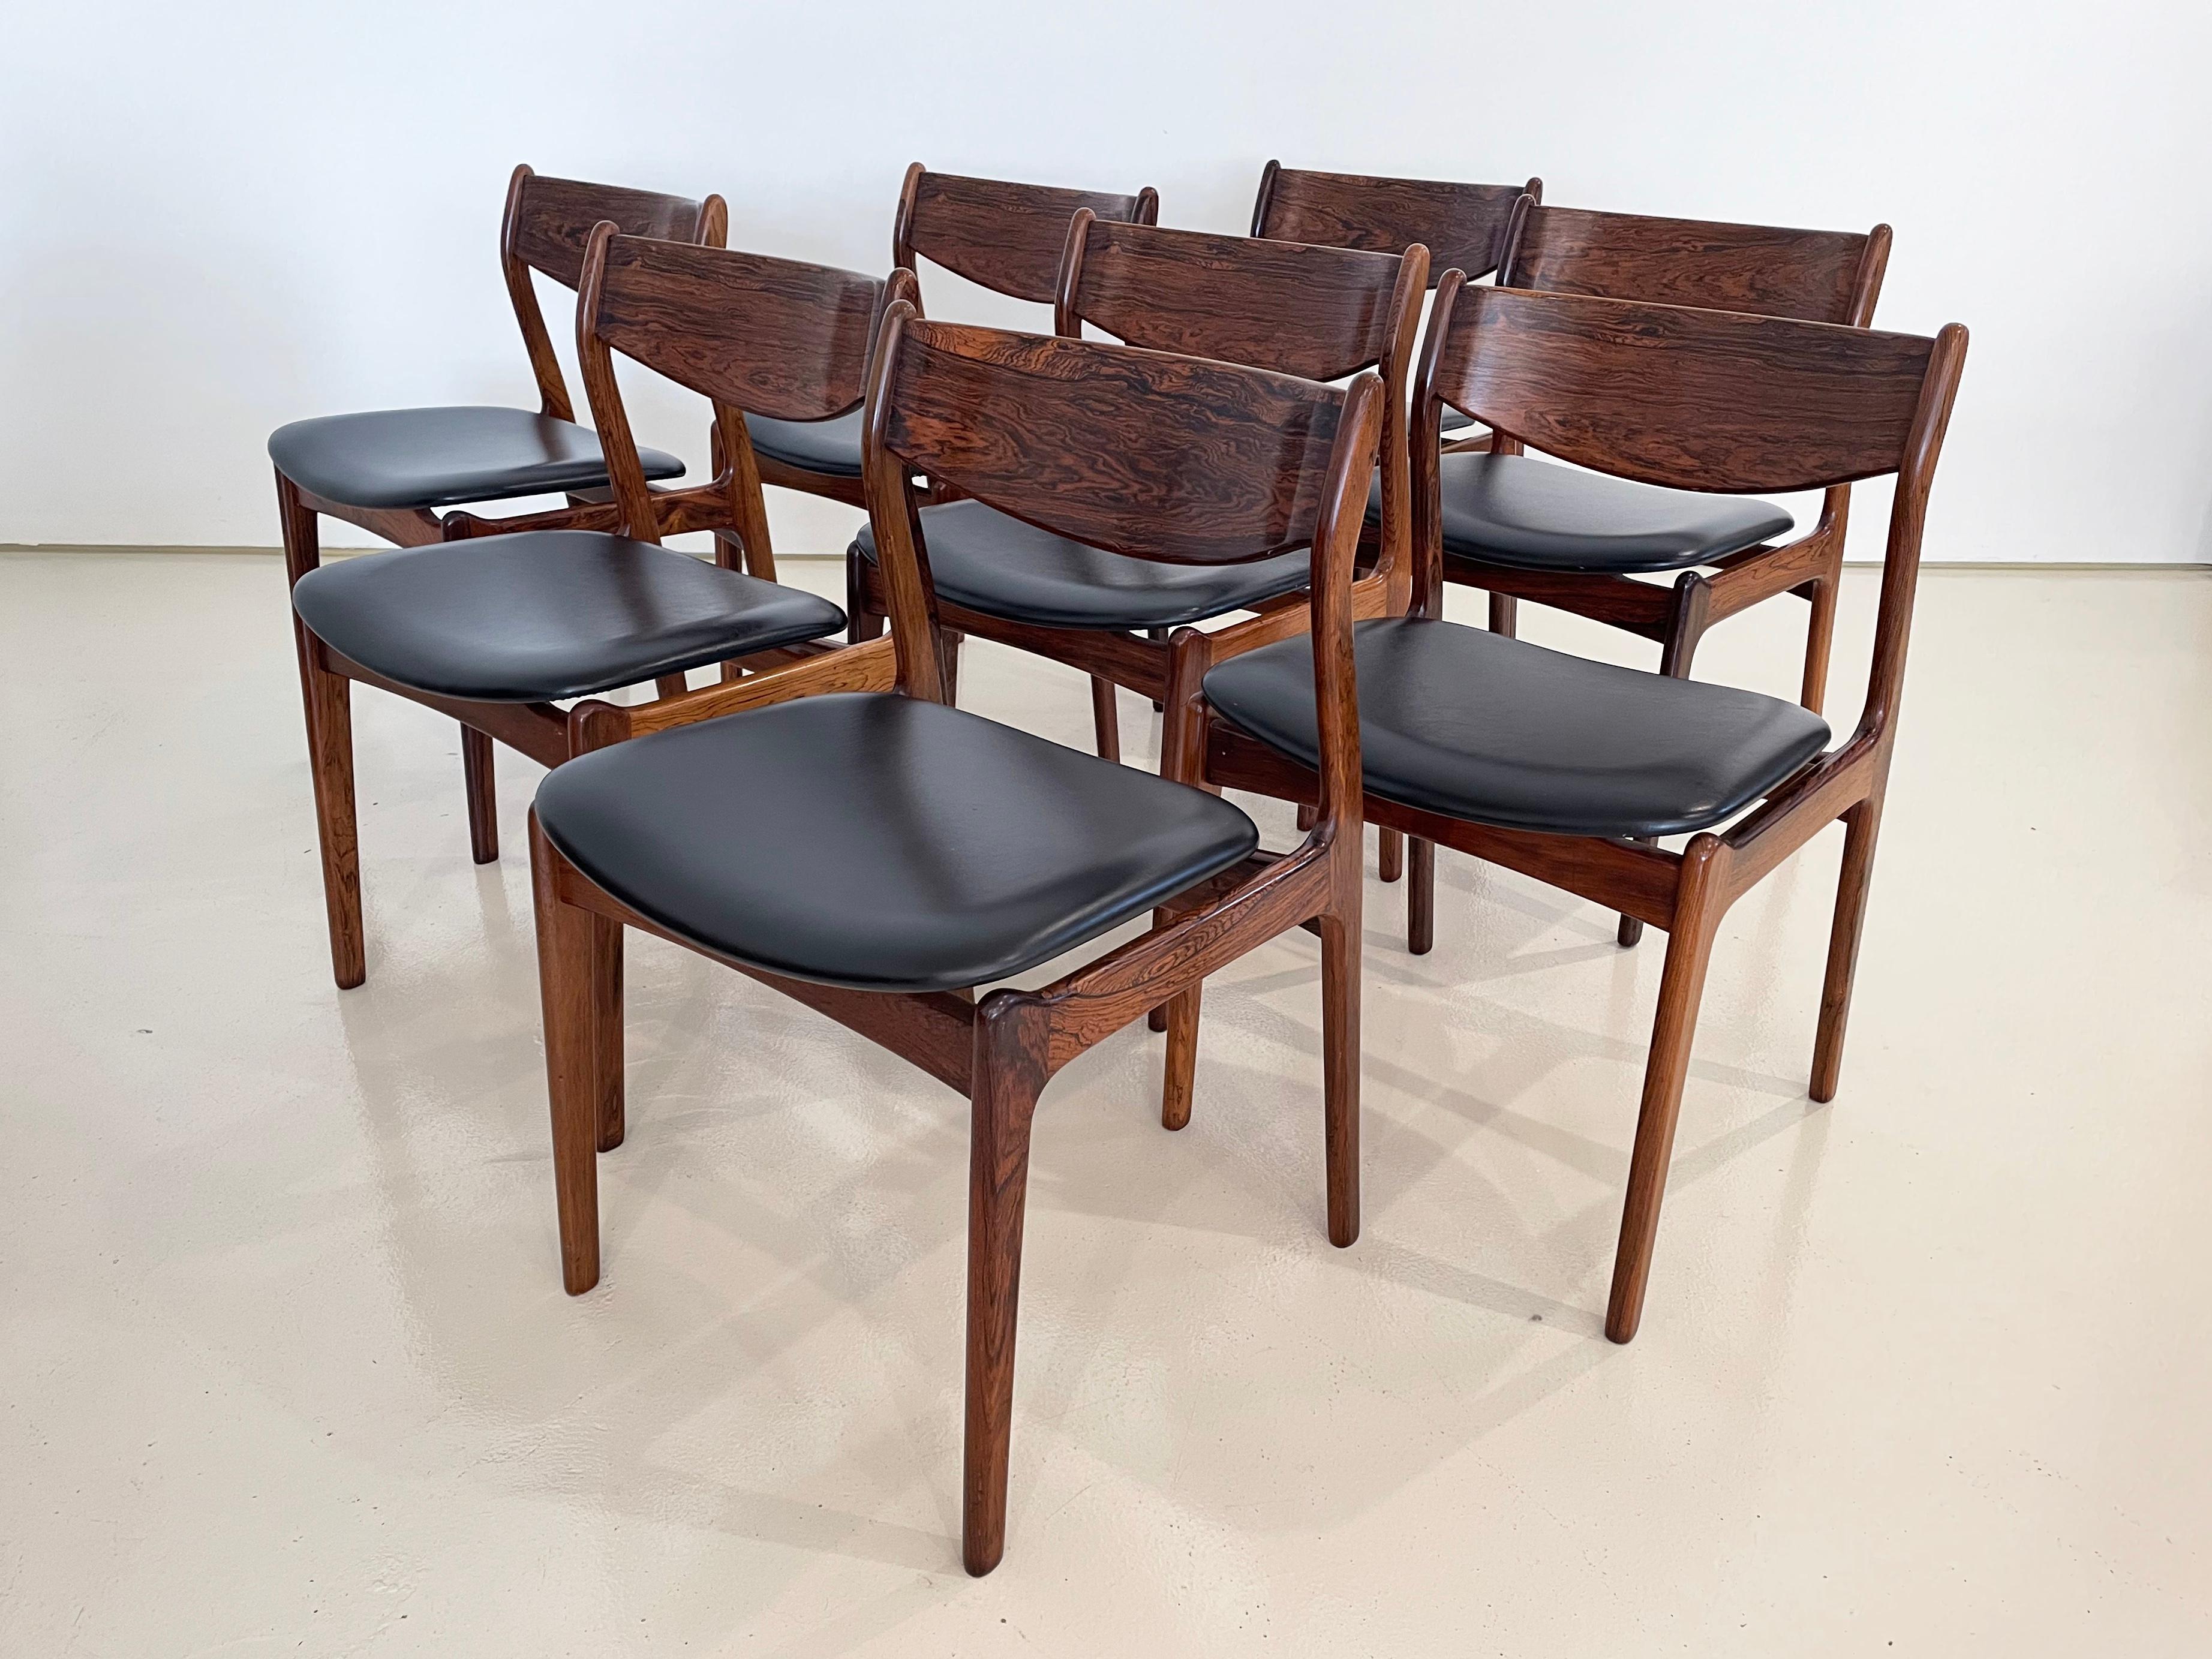 Hand-Crafted Vintage Mid-century Danish Dining Chairs, Designed by P.E. Jorgensen, Set of 8 For Sale